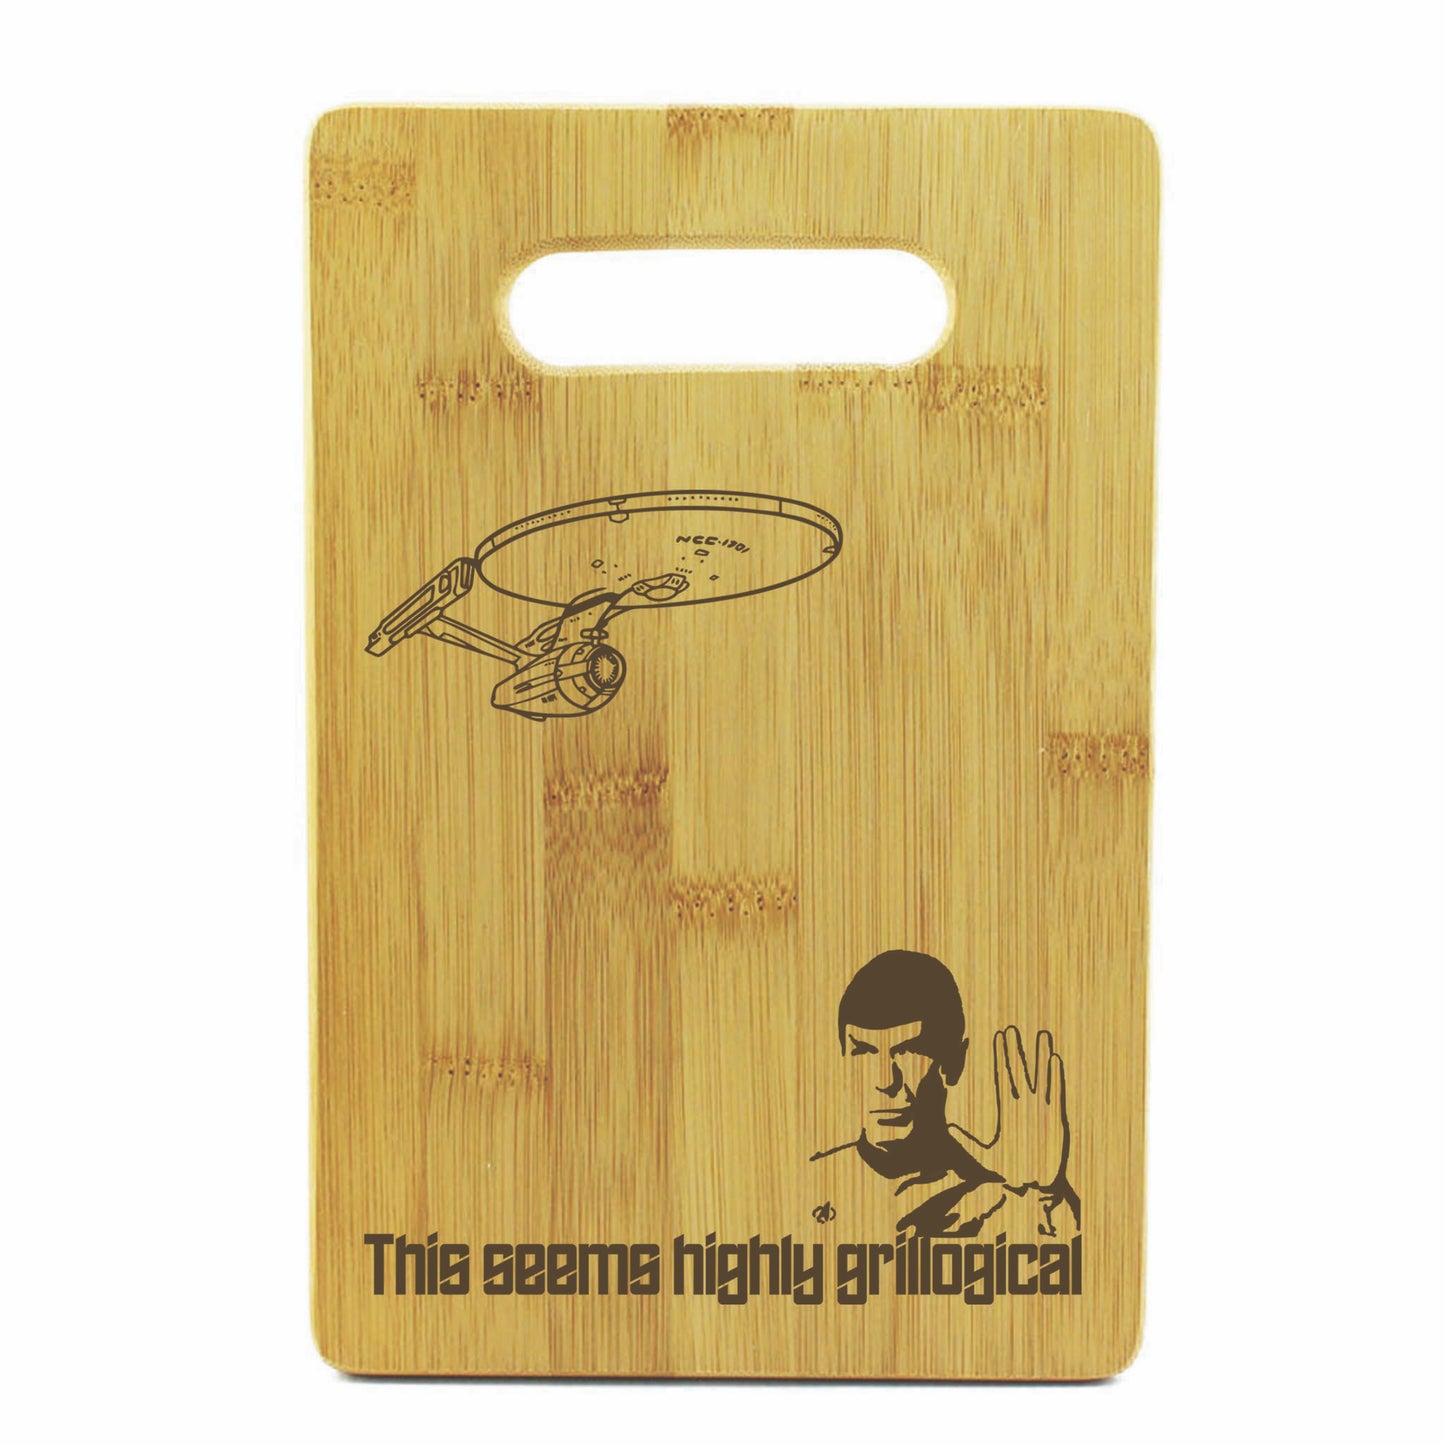 Star Trek Bamboo Cutting Boards | Spock | This Seems Highly Grillogical Wood Cutting Boards | Different Styles Available